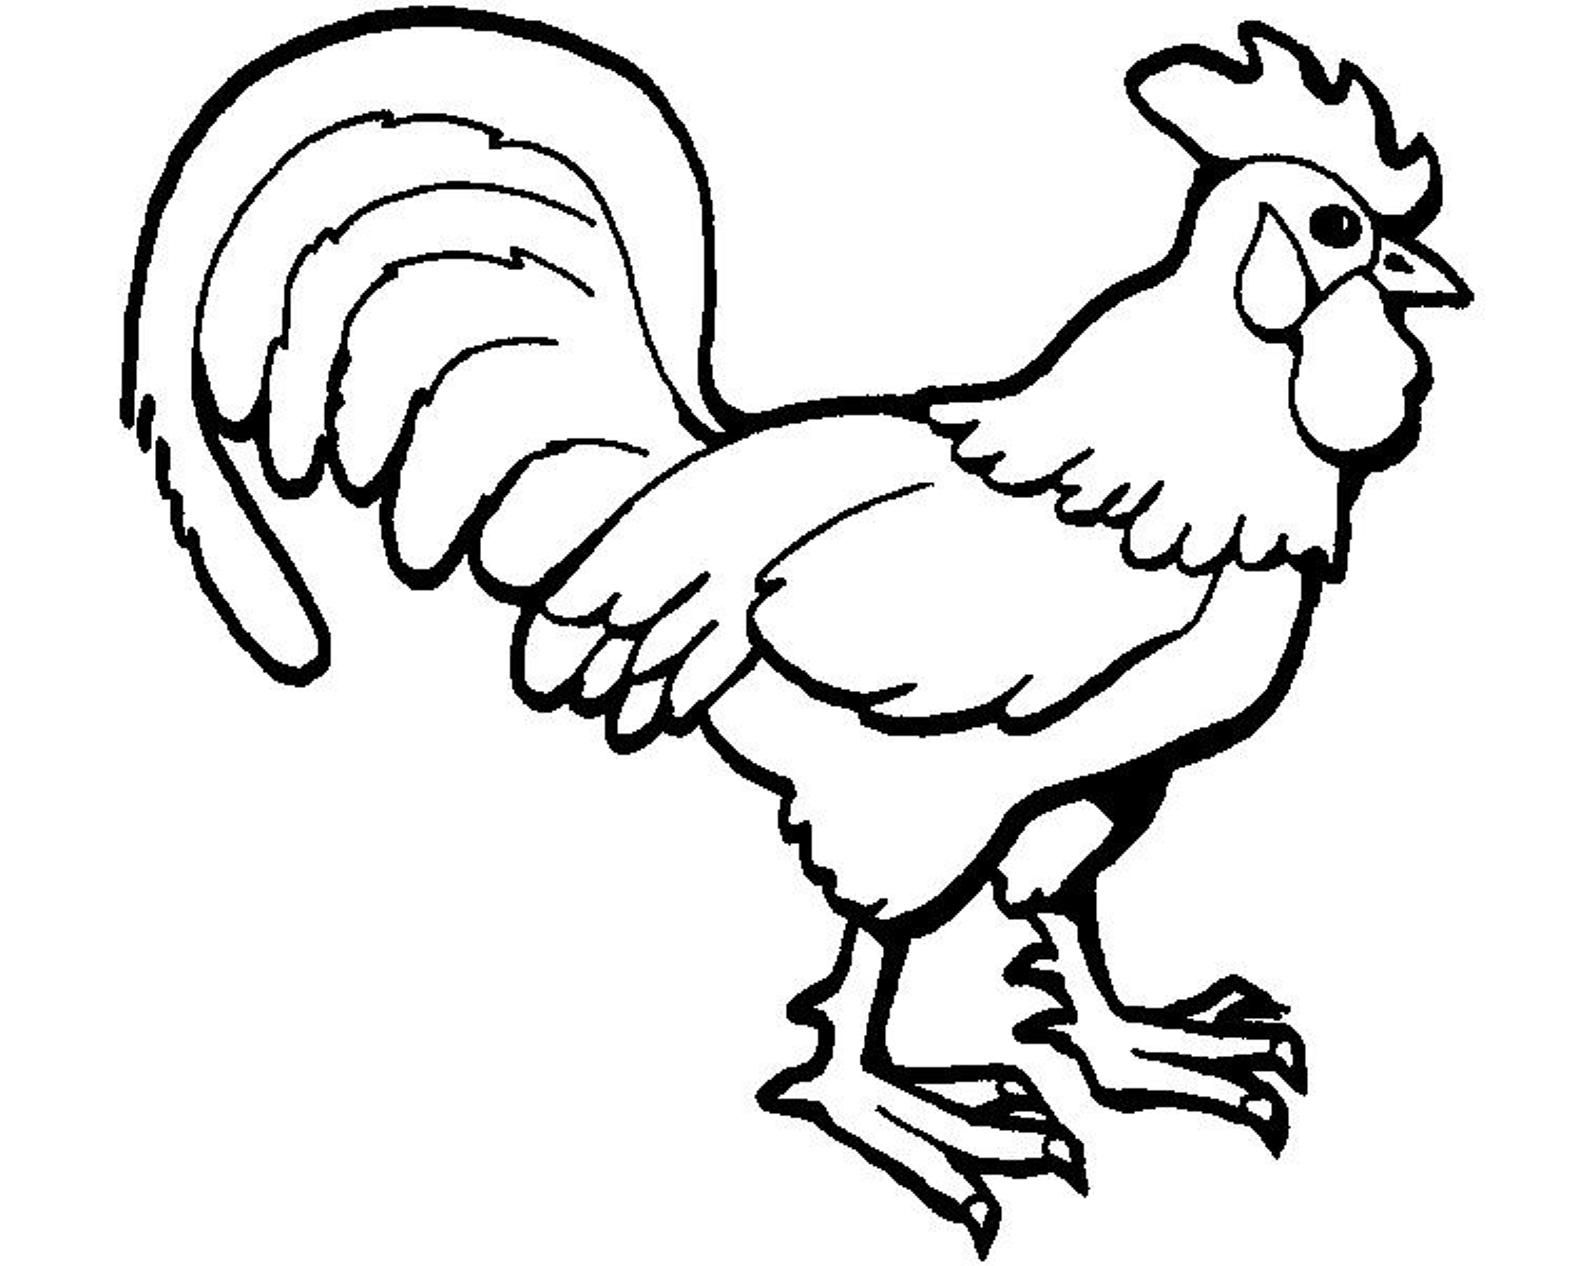 Free Rooster Farm Animal Coloring Pages For Kids - VoteForVerde.com